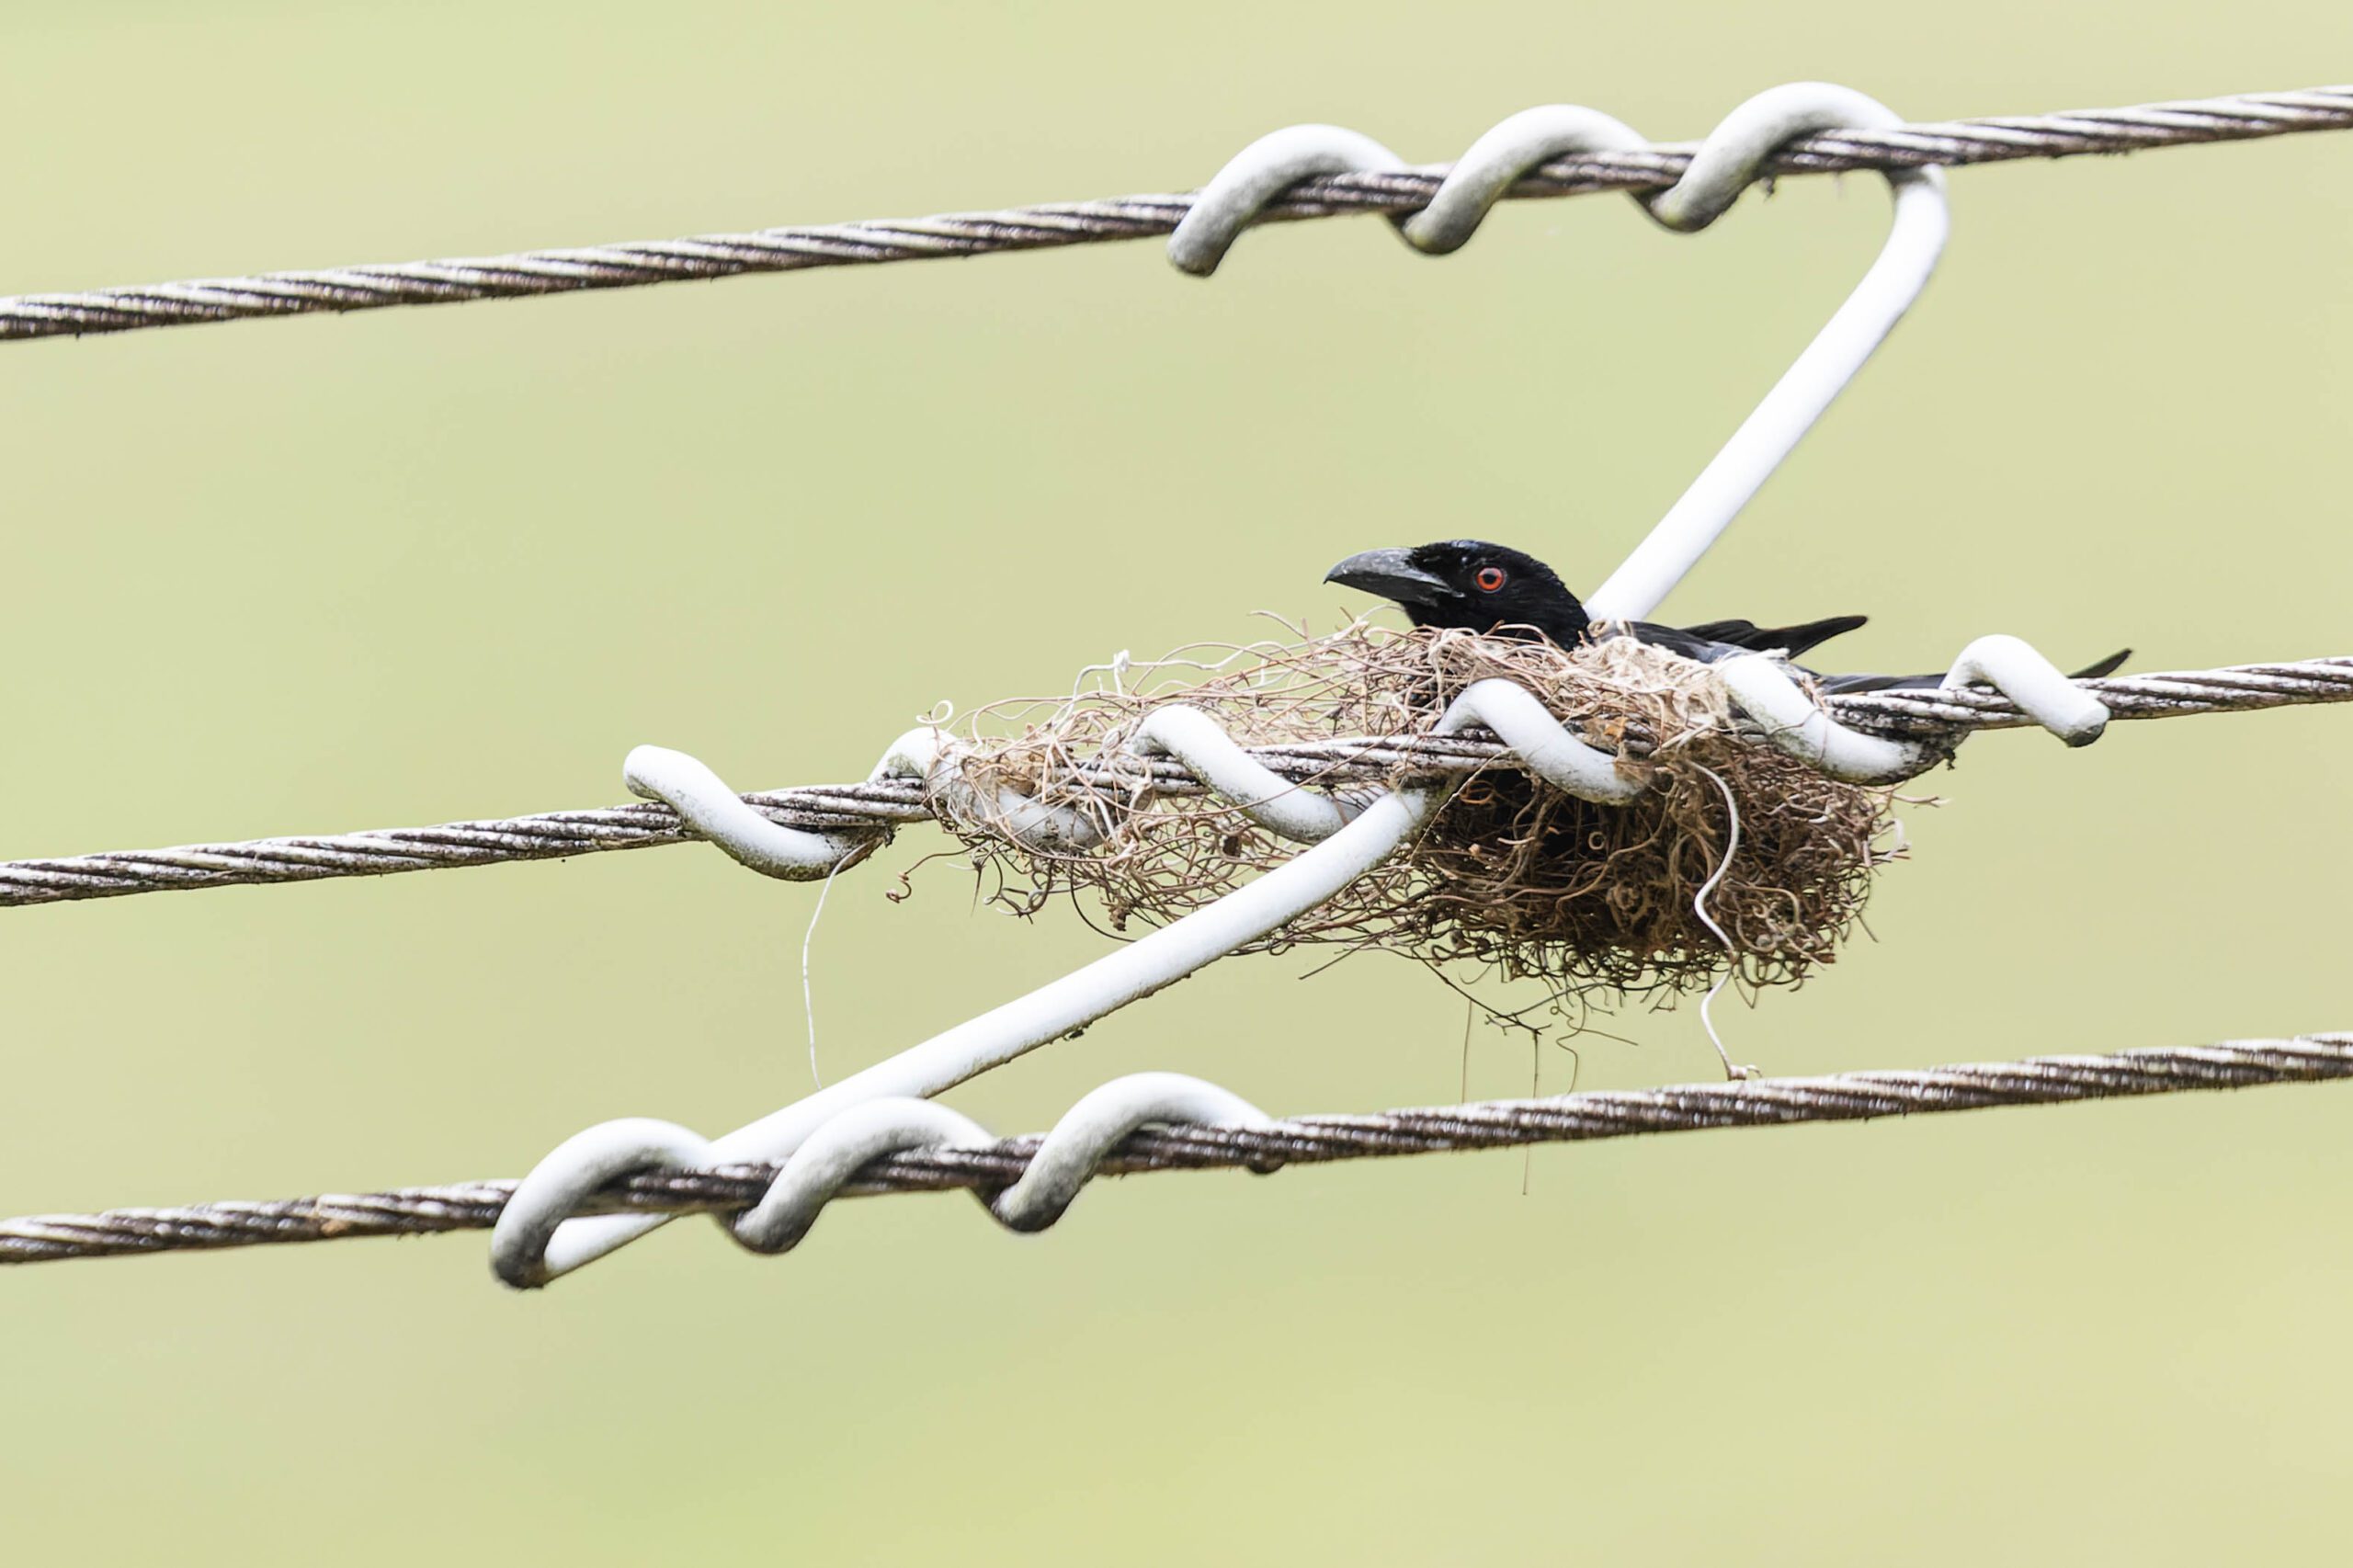 A black bird with a red eye in a nest balanced on cables.